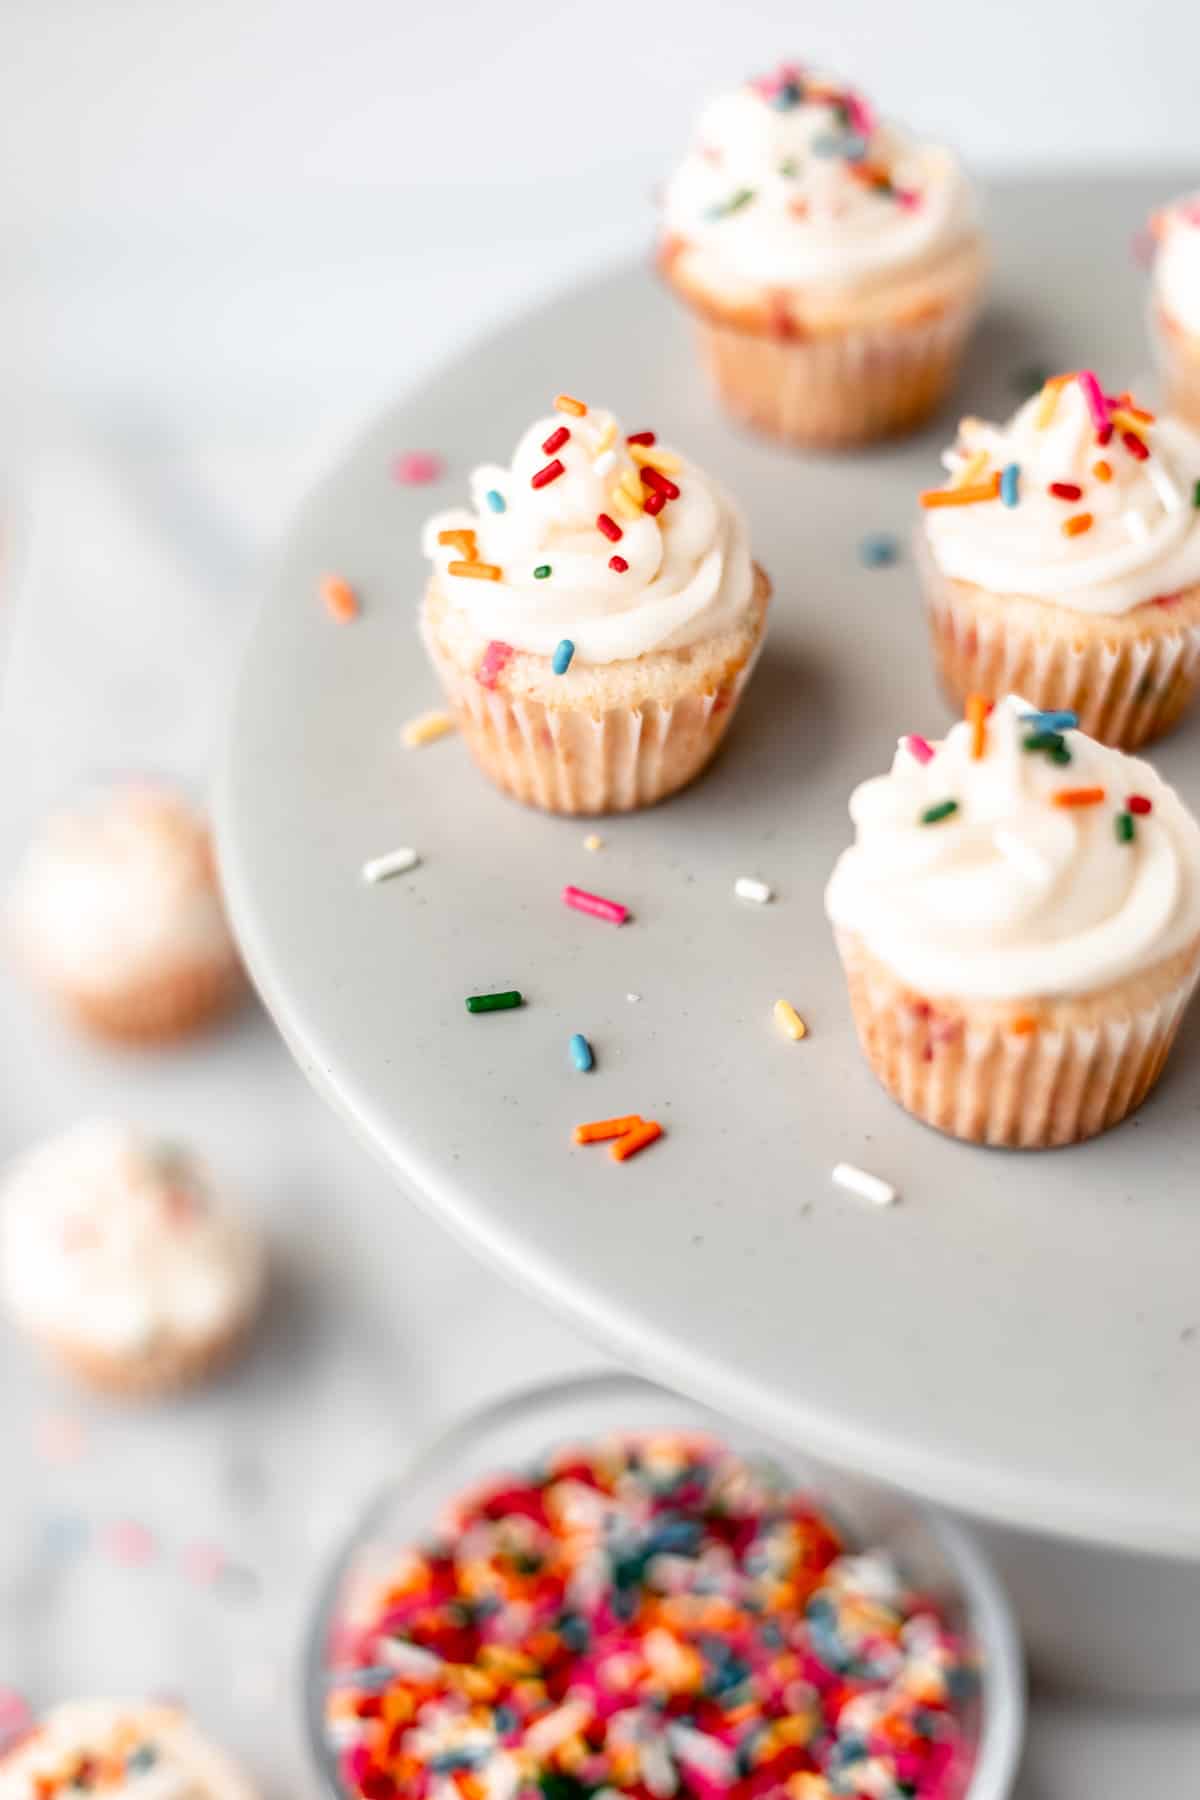 Mini sprinkle cupcakes on a gray cake stand with extra sprinkles around them and more cupcakes and a bowl of sprinkles below.